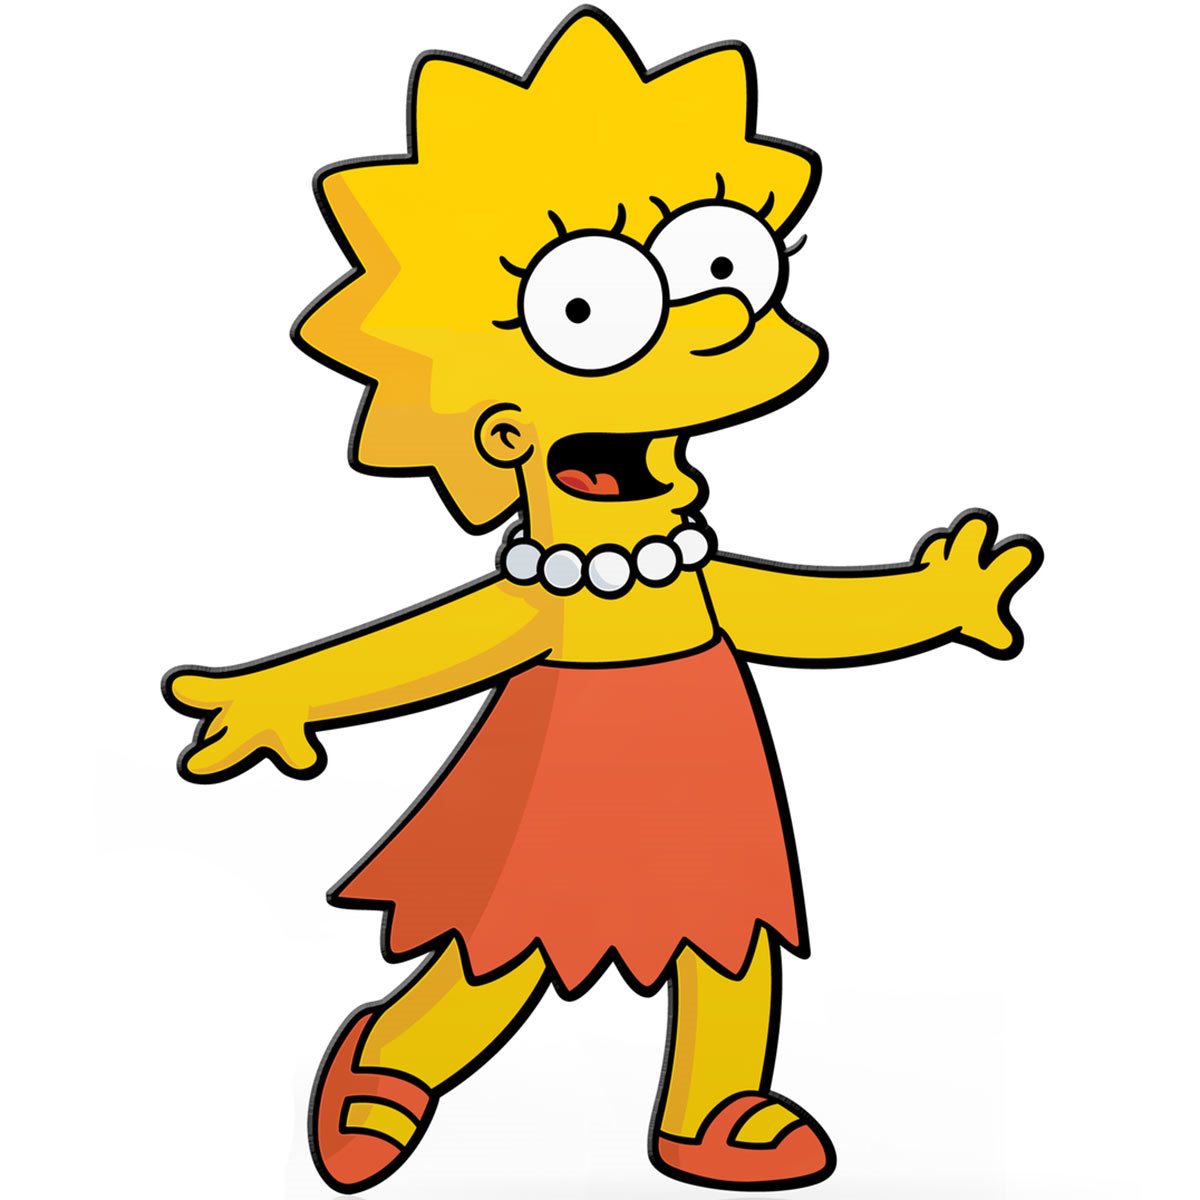 24-facts-about-lisa-simpson-the-simpsons